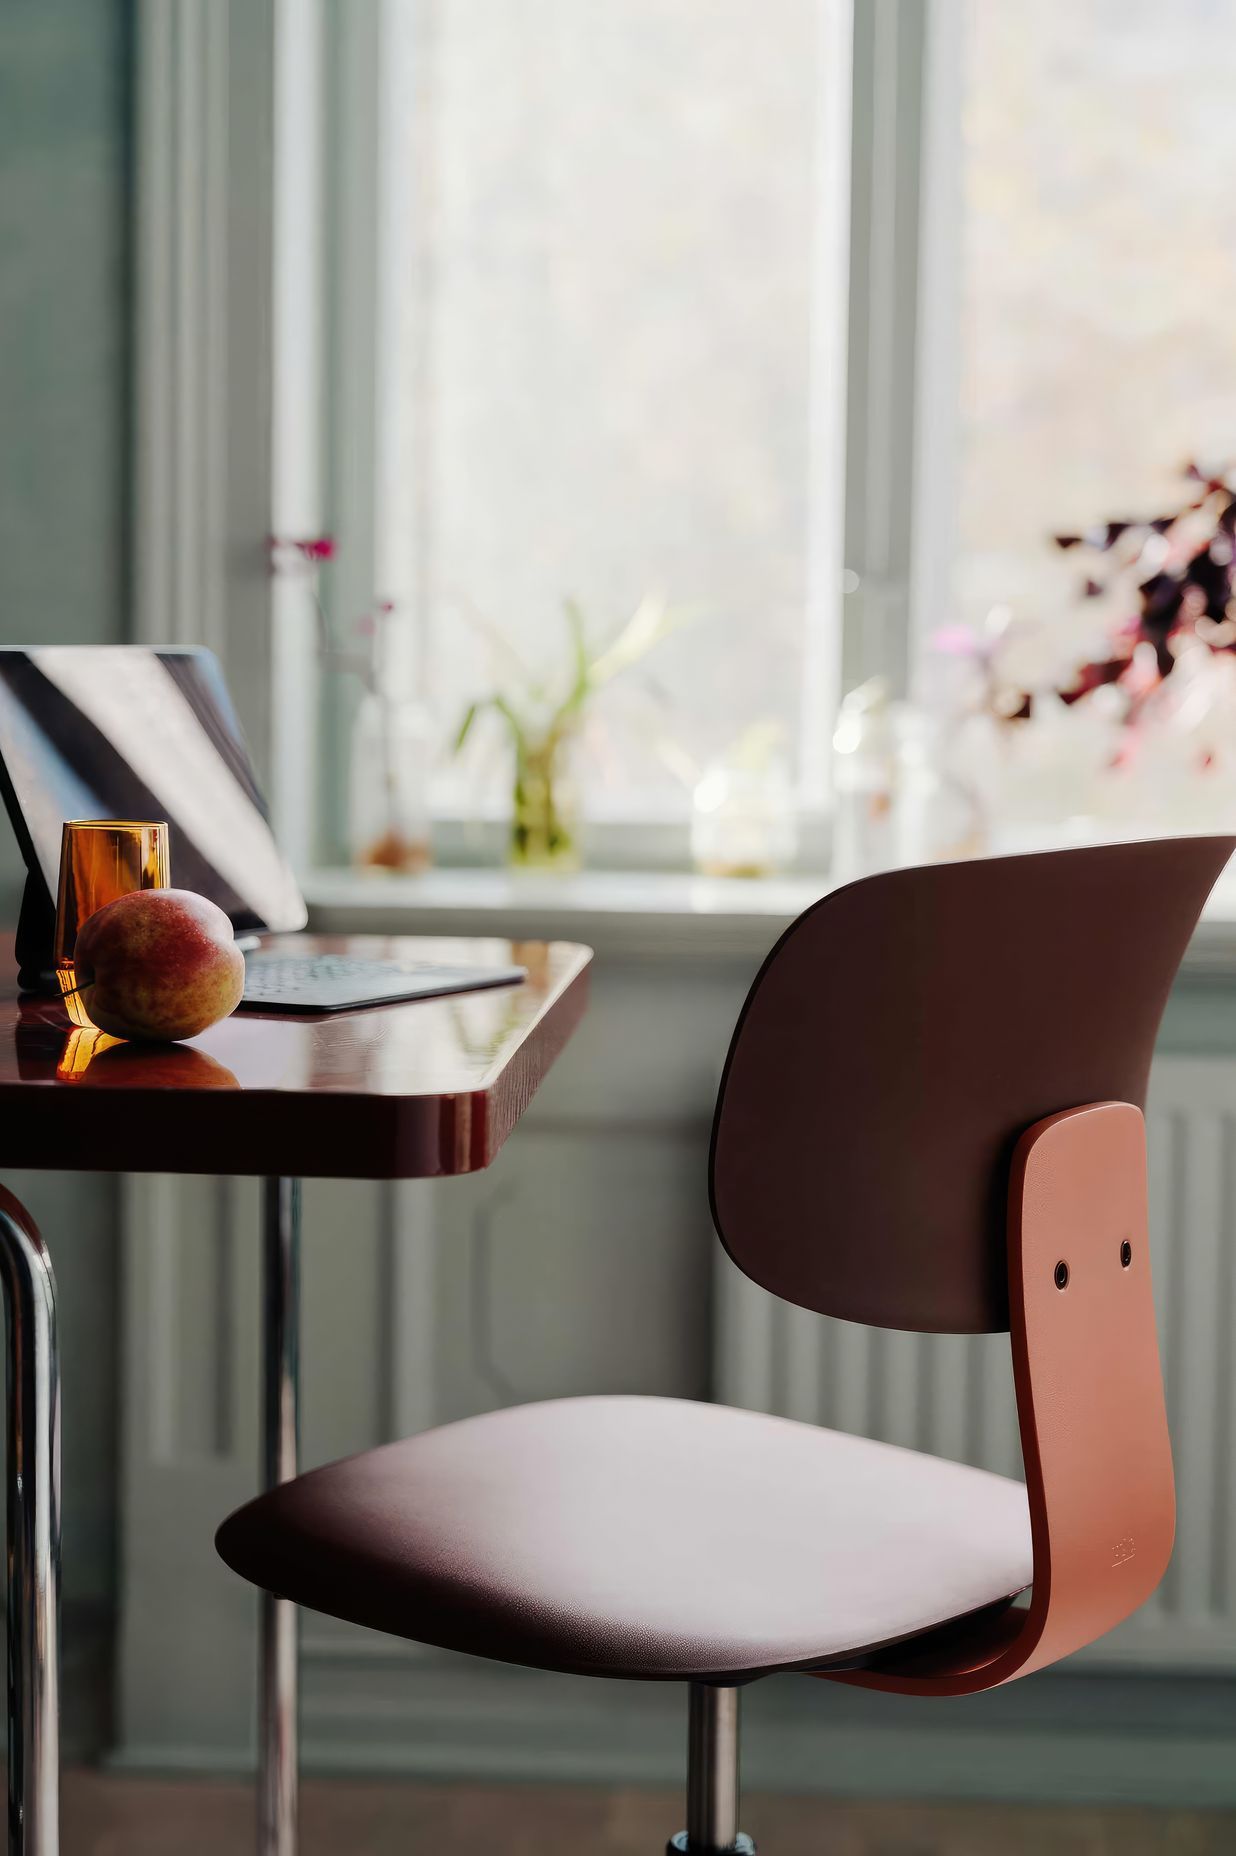 The HÅG Tion is one of the most sustainably designed task chairs available, made from 70-75% recycled materials | Ft. HÅG Tion 2100 in Chestnut/Blush